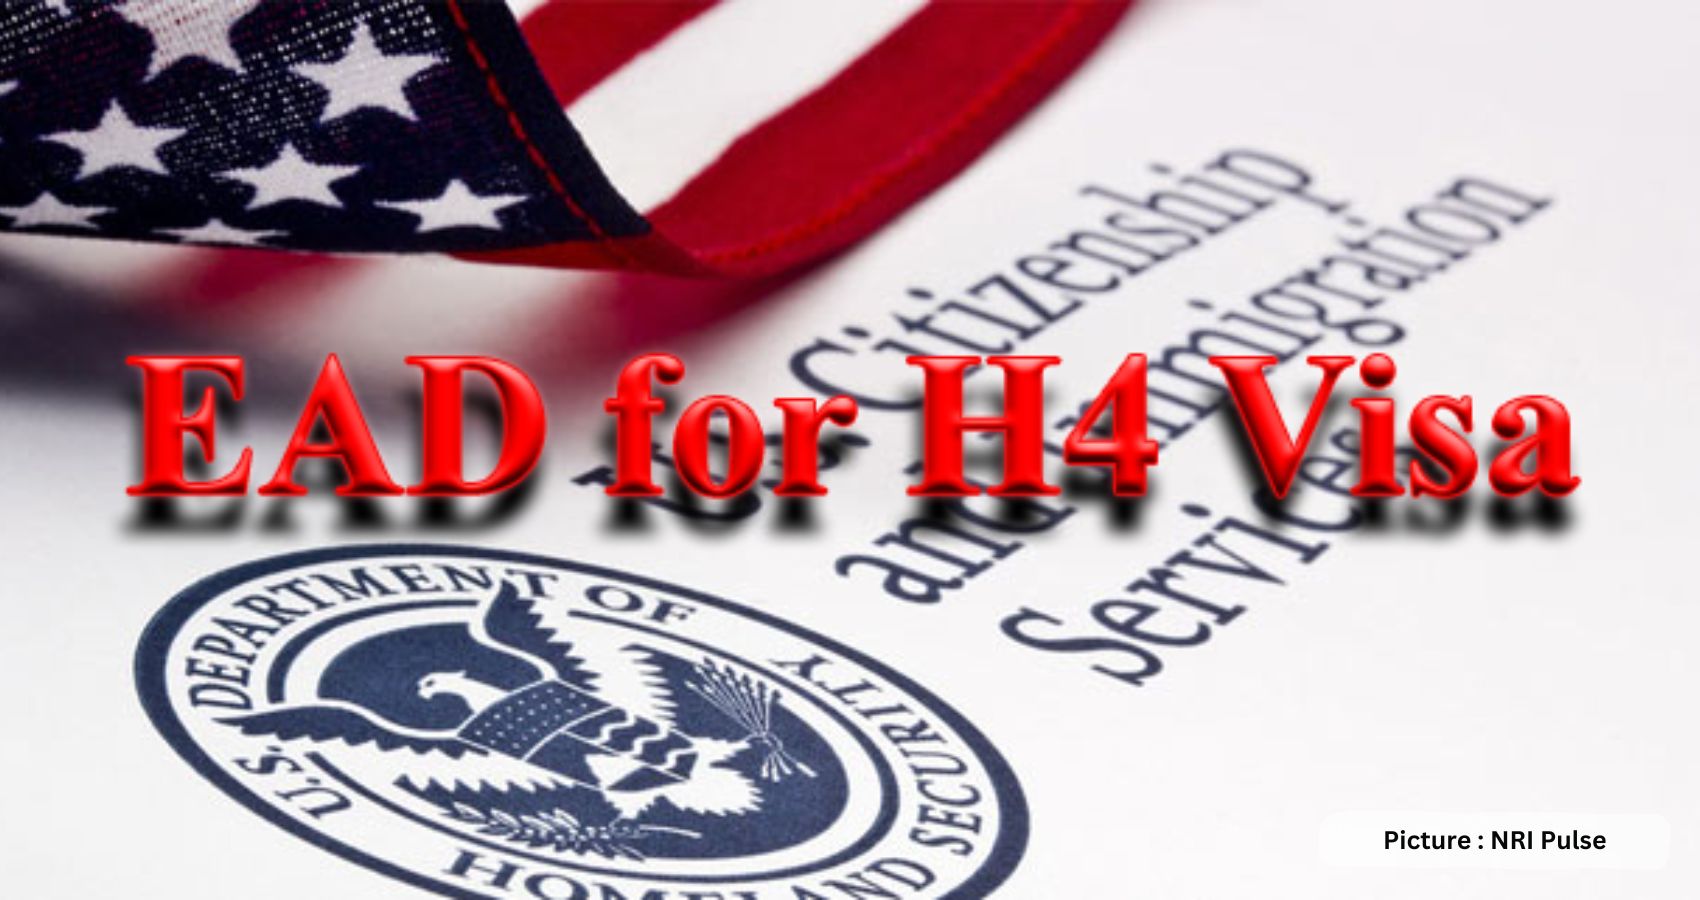 Spouses Of H-1B Visa Holders In Tech Sector Can Work